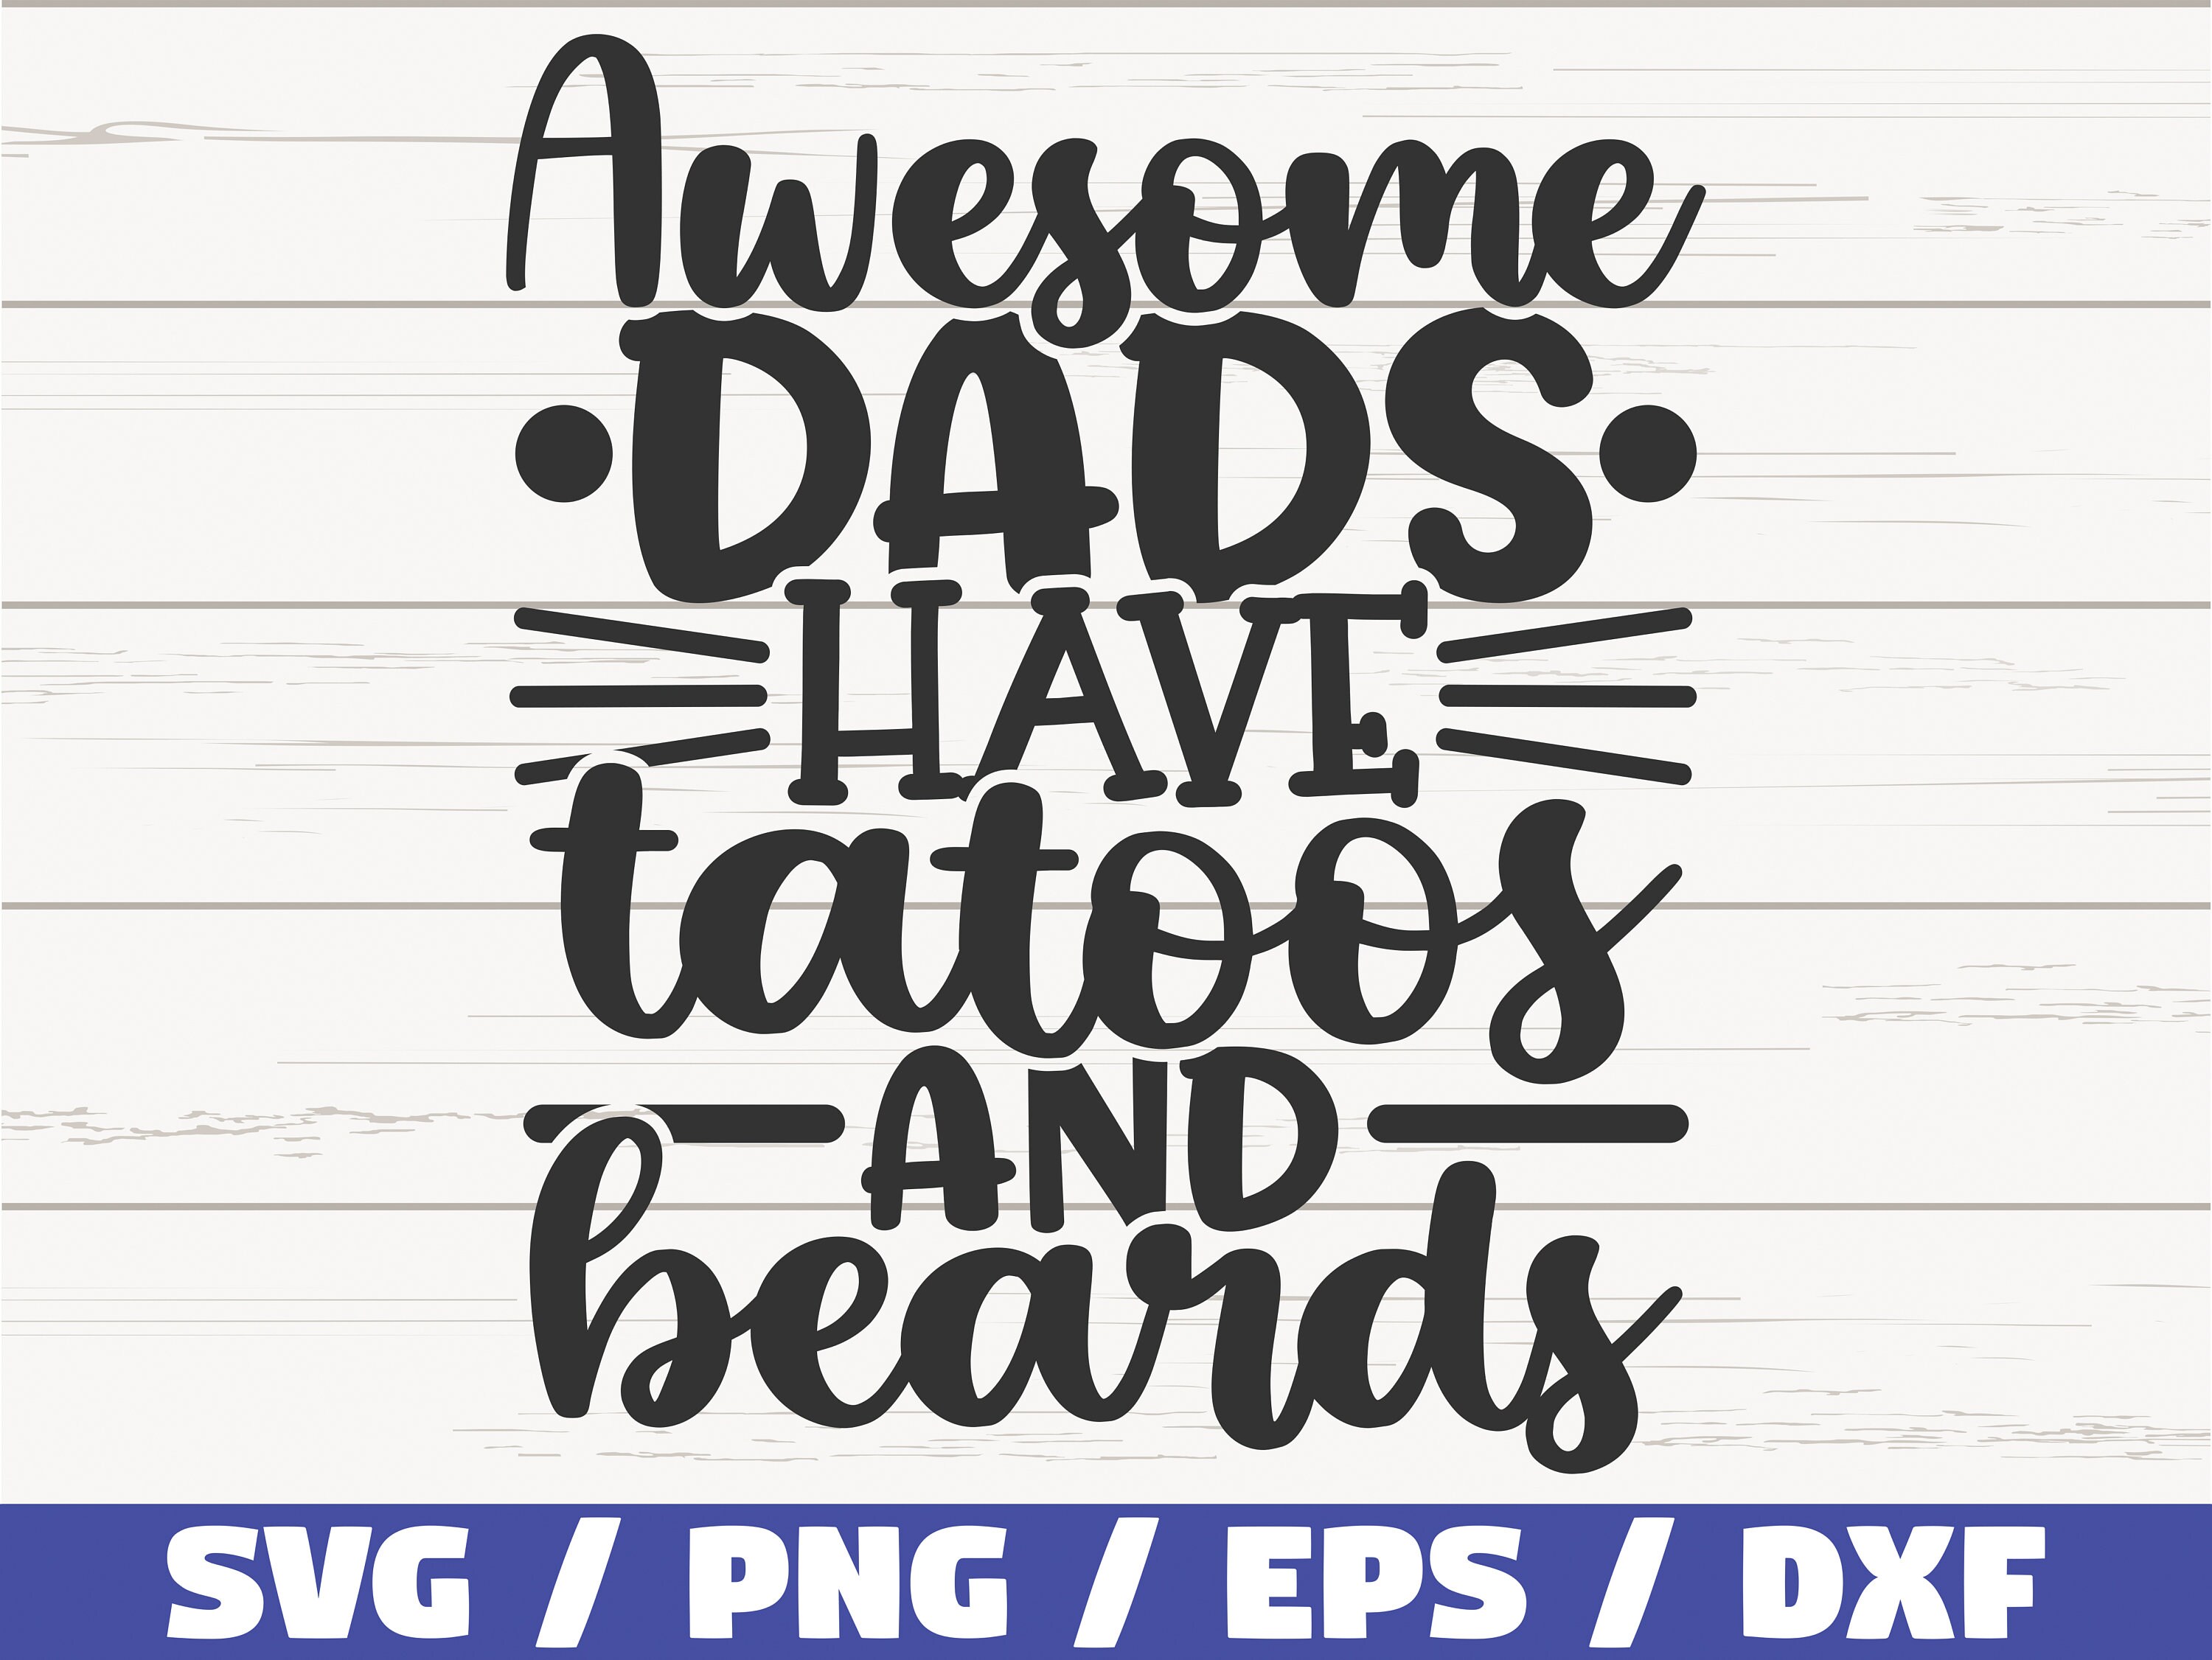 Awesome Dads Have Tattoos and Beards SVG / Cut File / Cricut / | Etsy